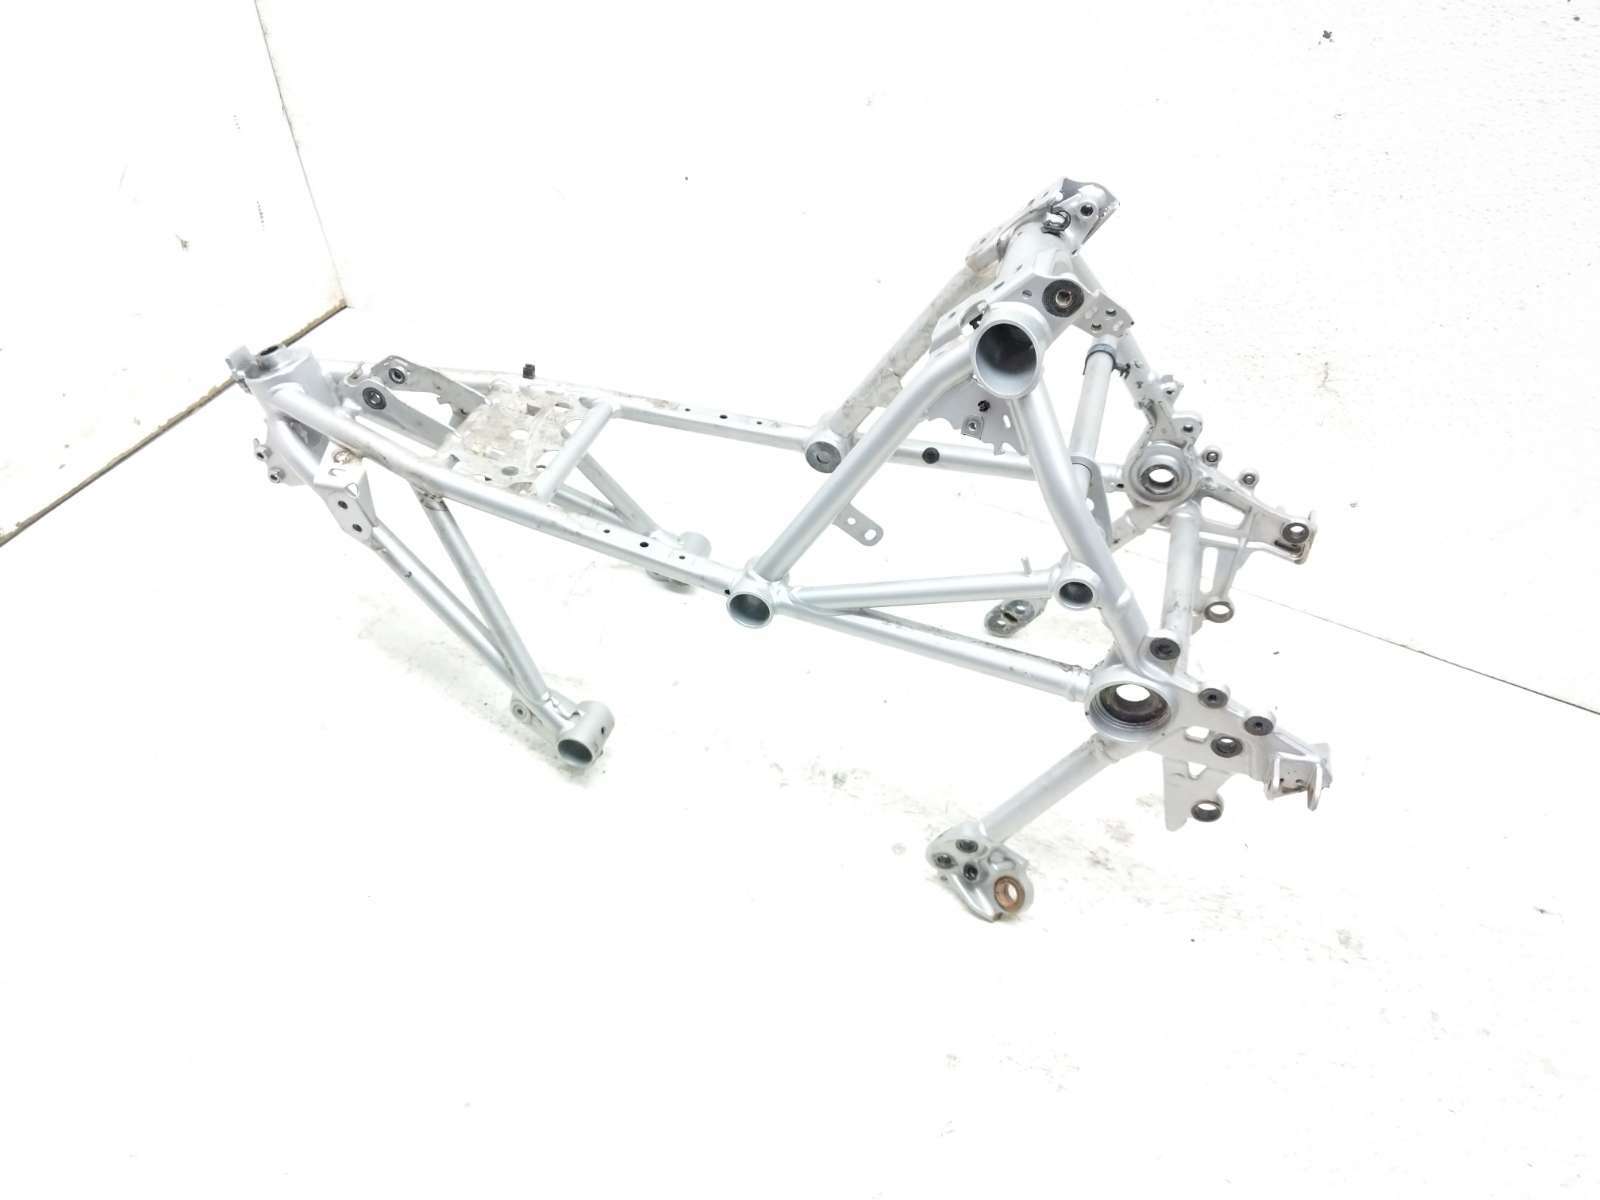 14 BMW R1200GS Main Frame Chassis STRAIGHT CLN